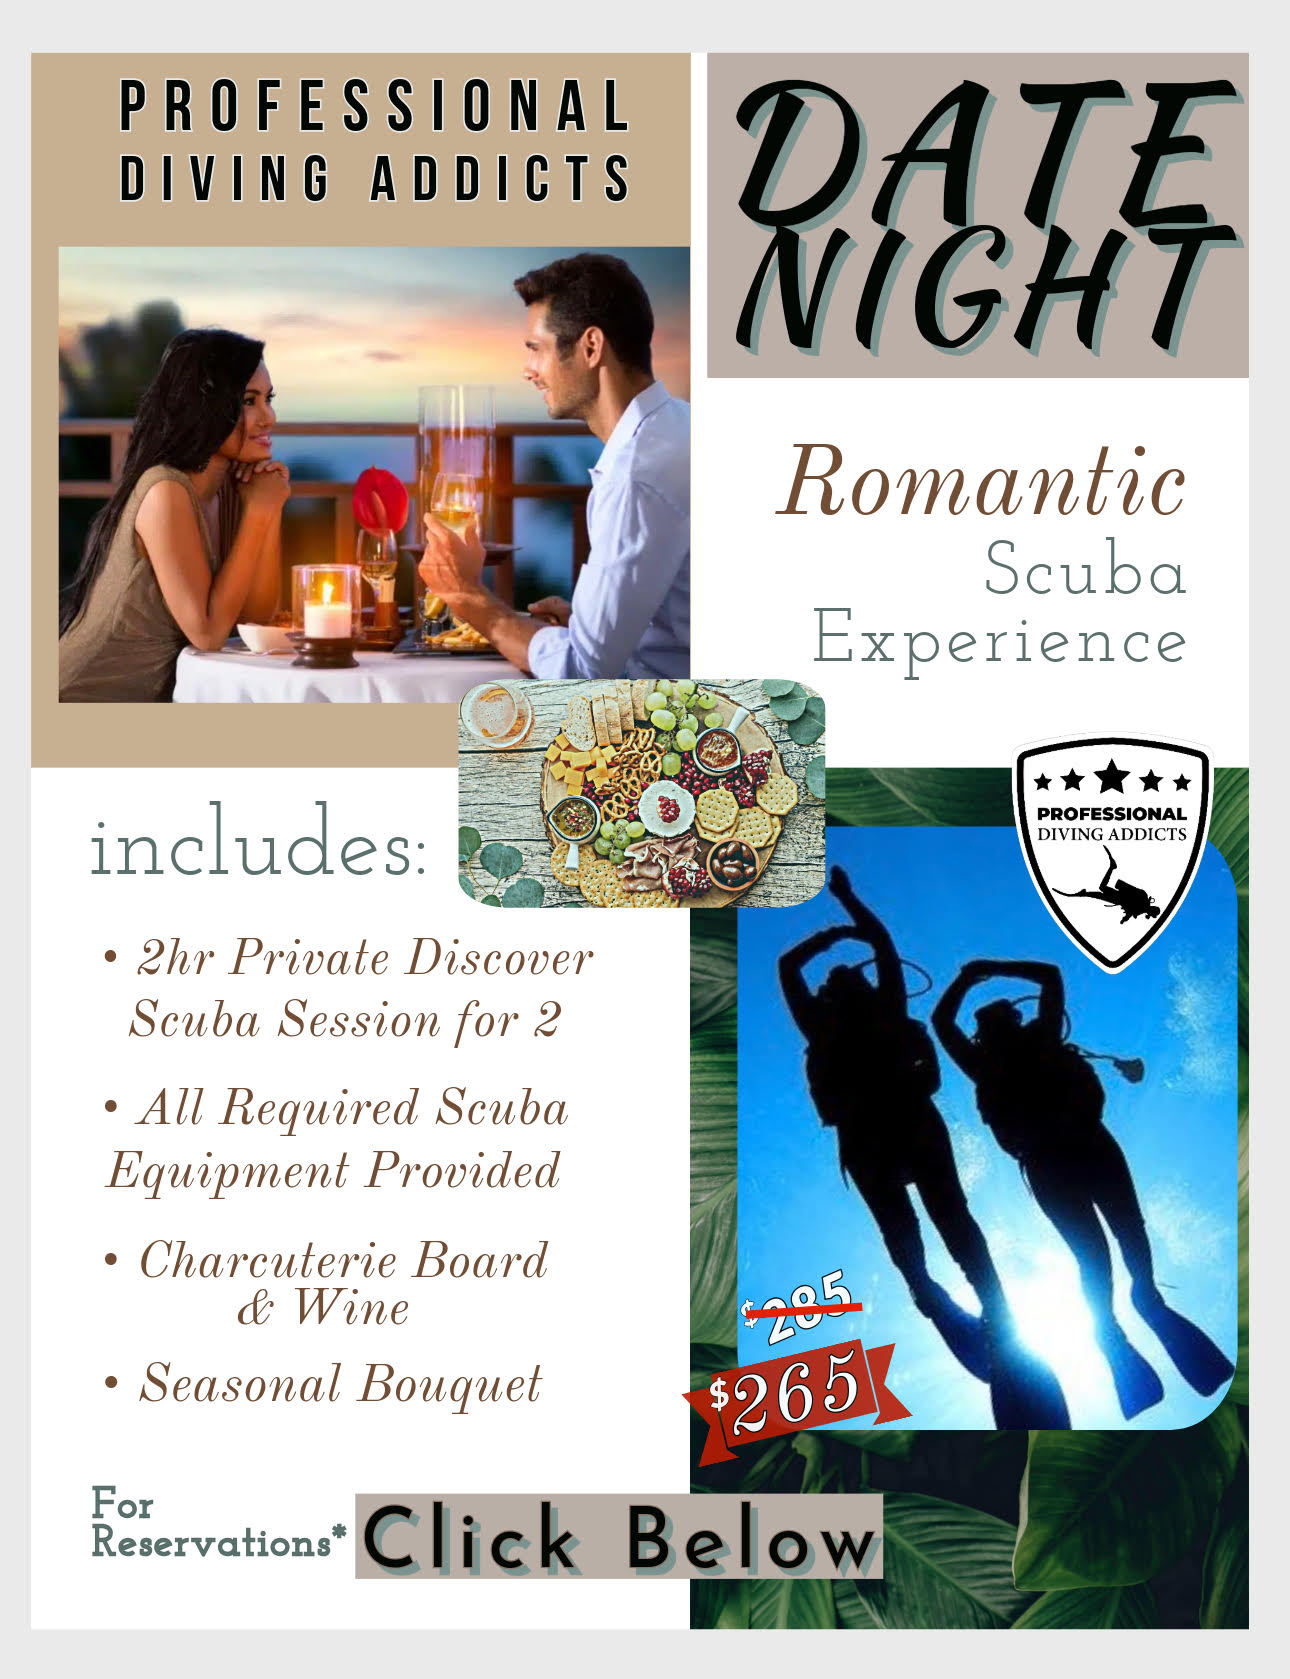 Marketing flyer for scuba date night - Discover Scuba with romantic refreshments after scuba diving